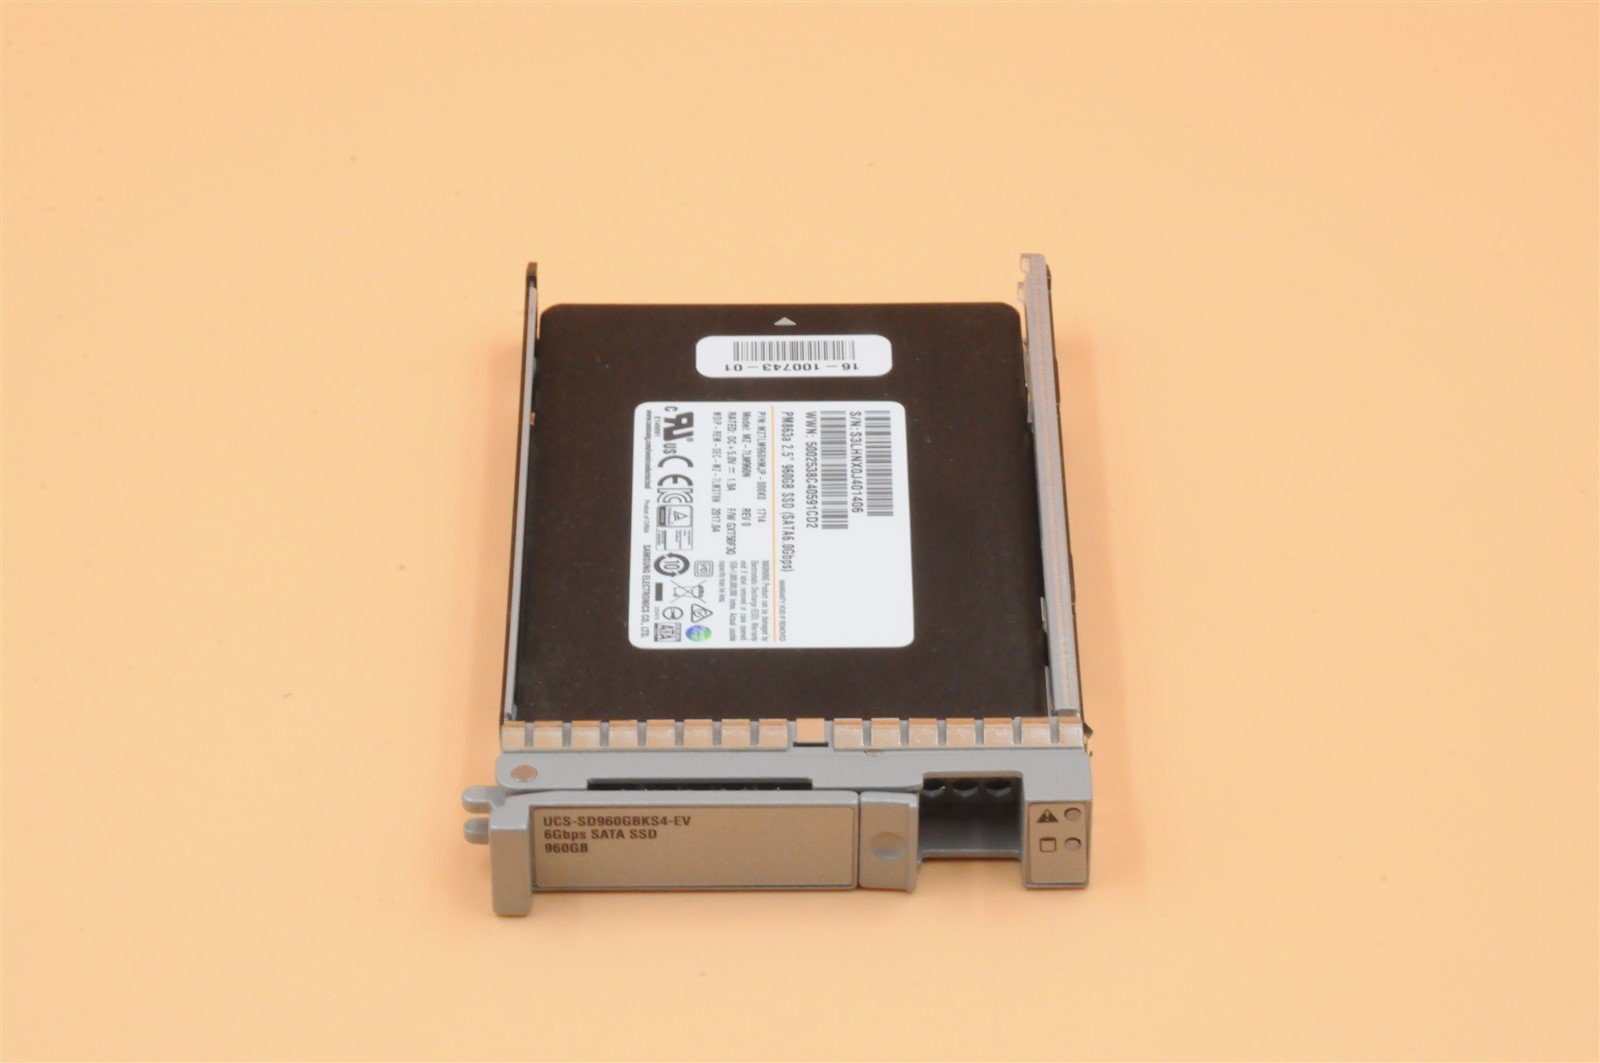 UCS-SD960GBKS4-EV MZ-7LM960N PM863A CISCO 960GB 6G 2.5" SATA TLC SOLID STATE DRIVE